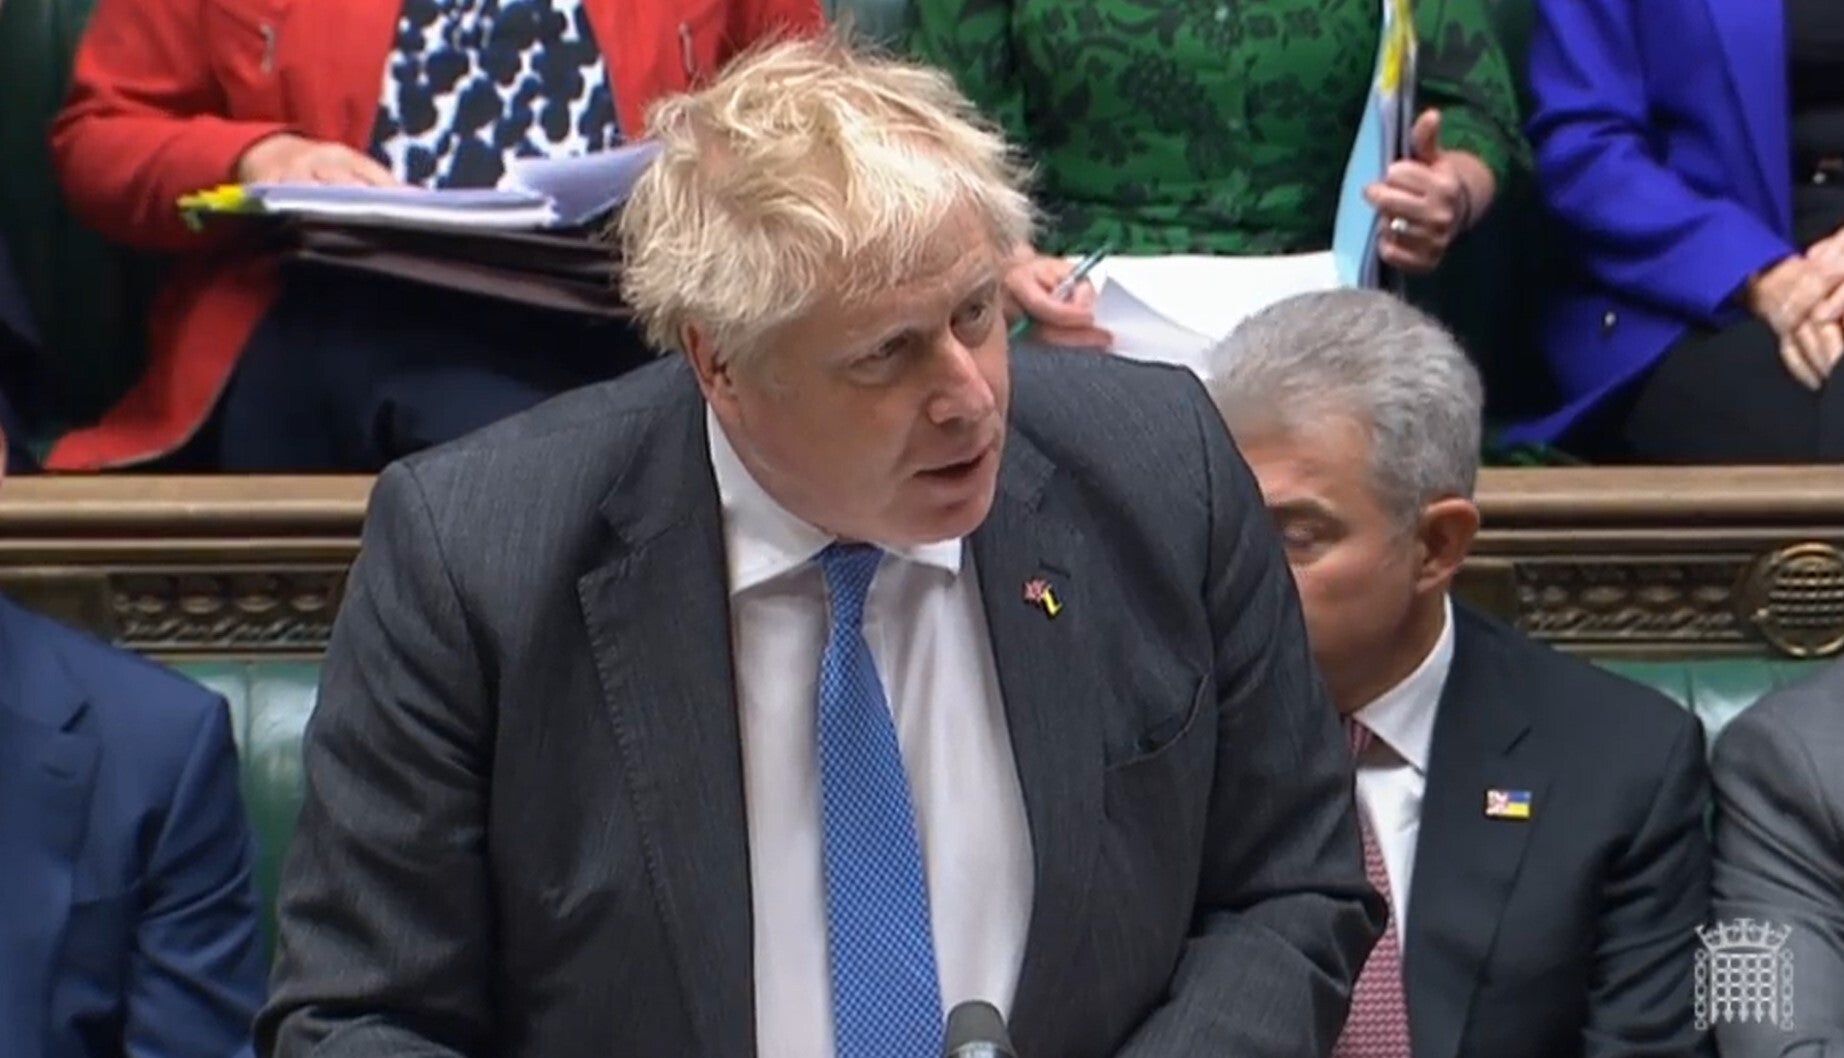 Boris Johnson apologised in the Commons but faces calls to resign by grieved relatives